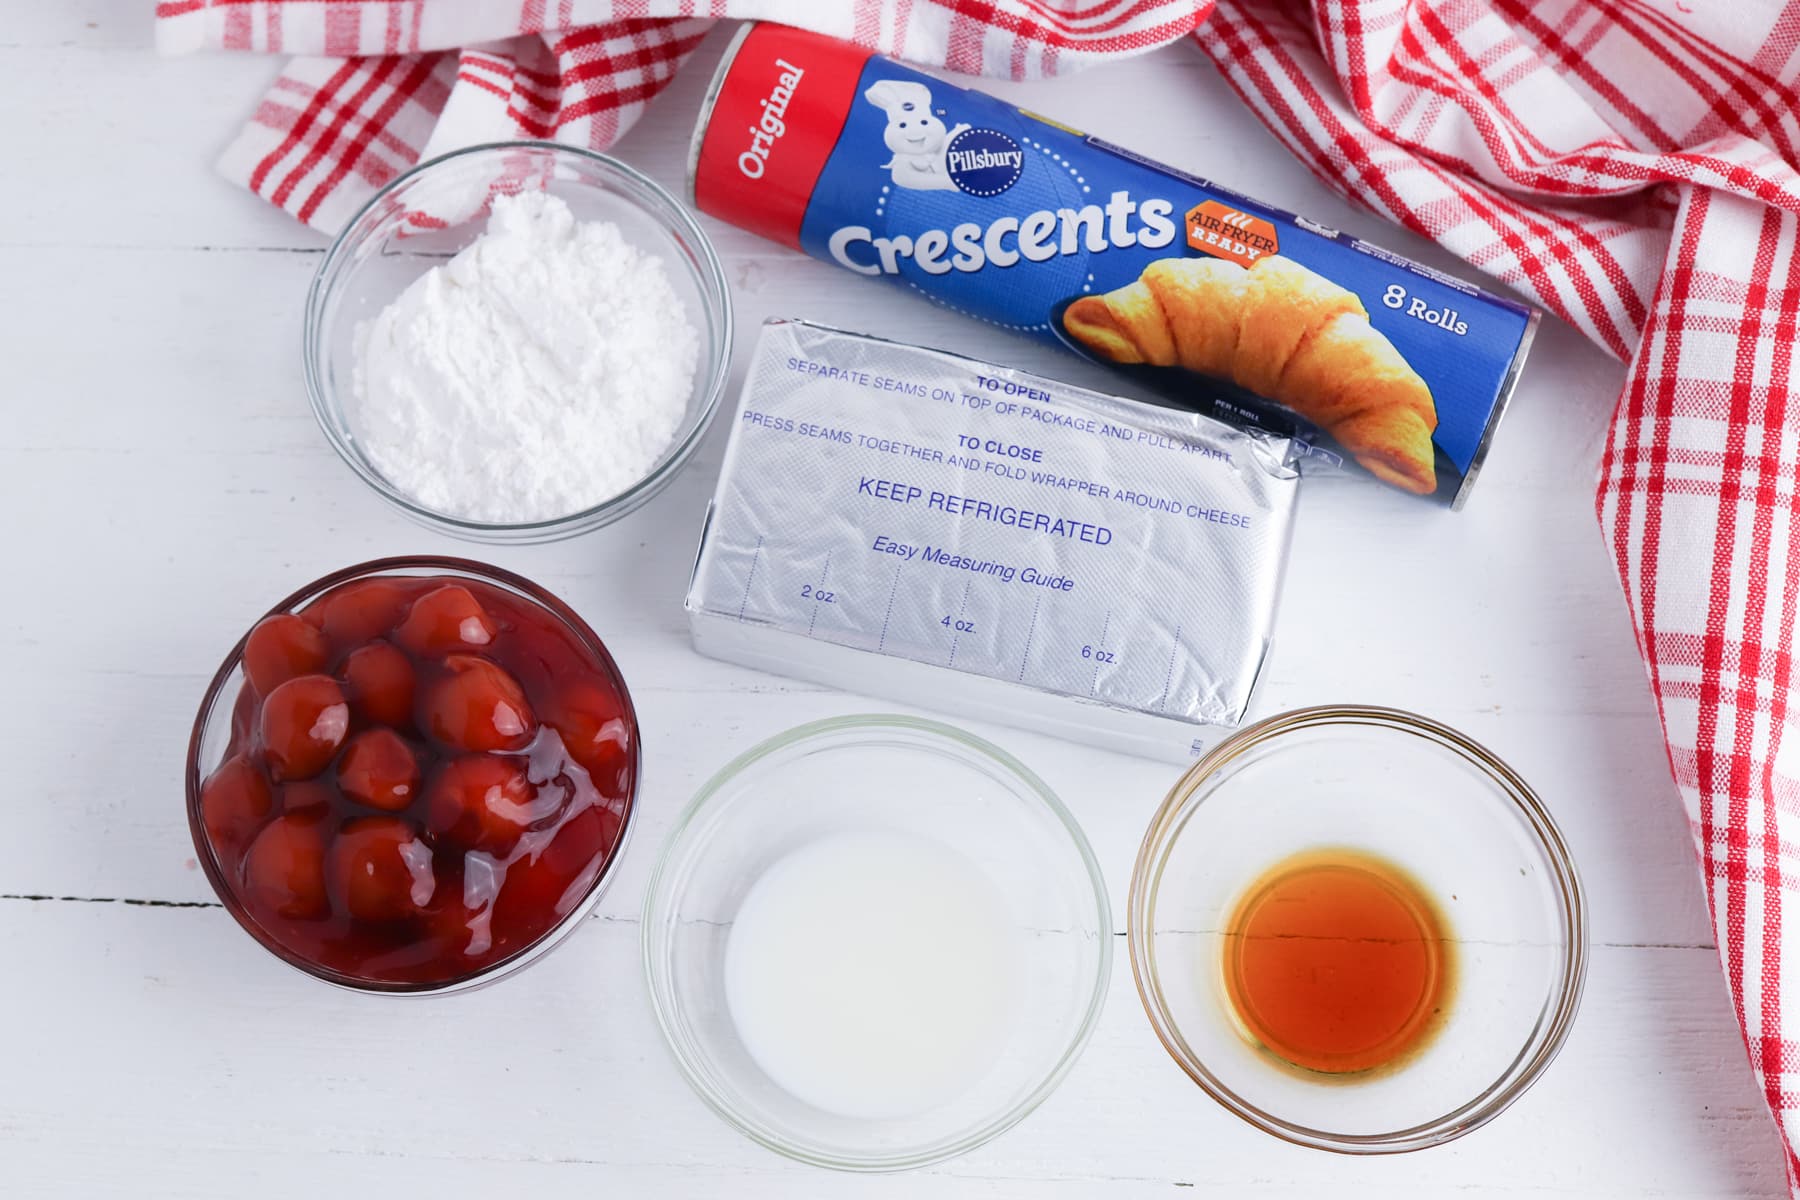 Ingredients for cherry cheesecake cups include crescent rolls , cream cheese, softened, vanilla extract, powdered sugar, cherry pie filling, powdered sugar, and cherry pie filling